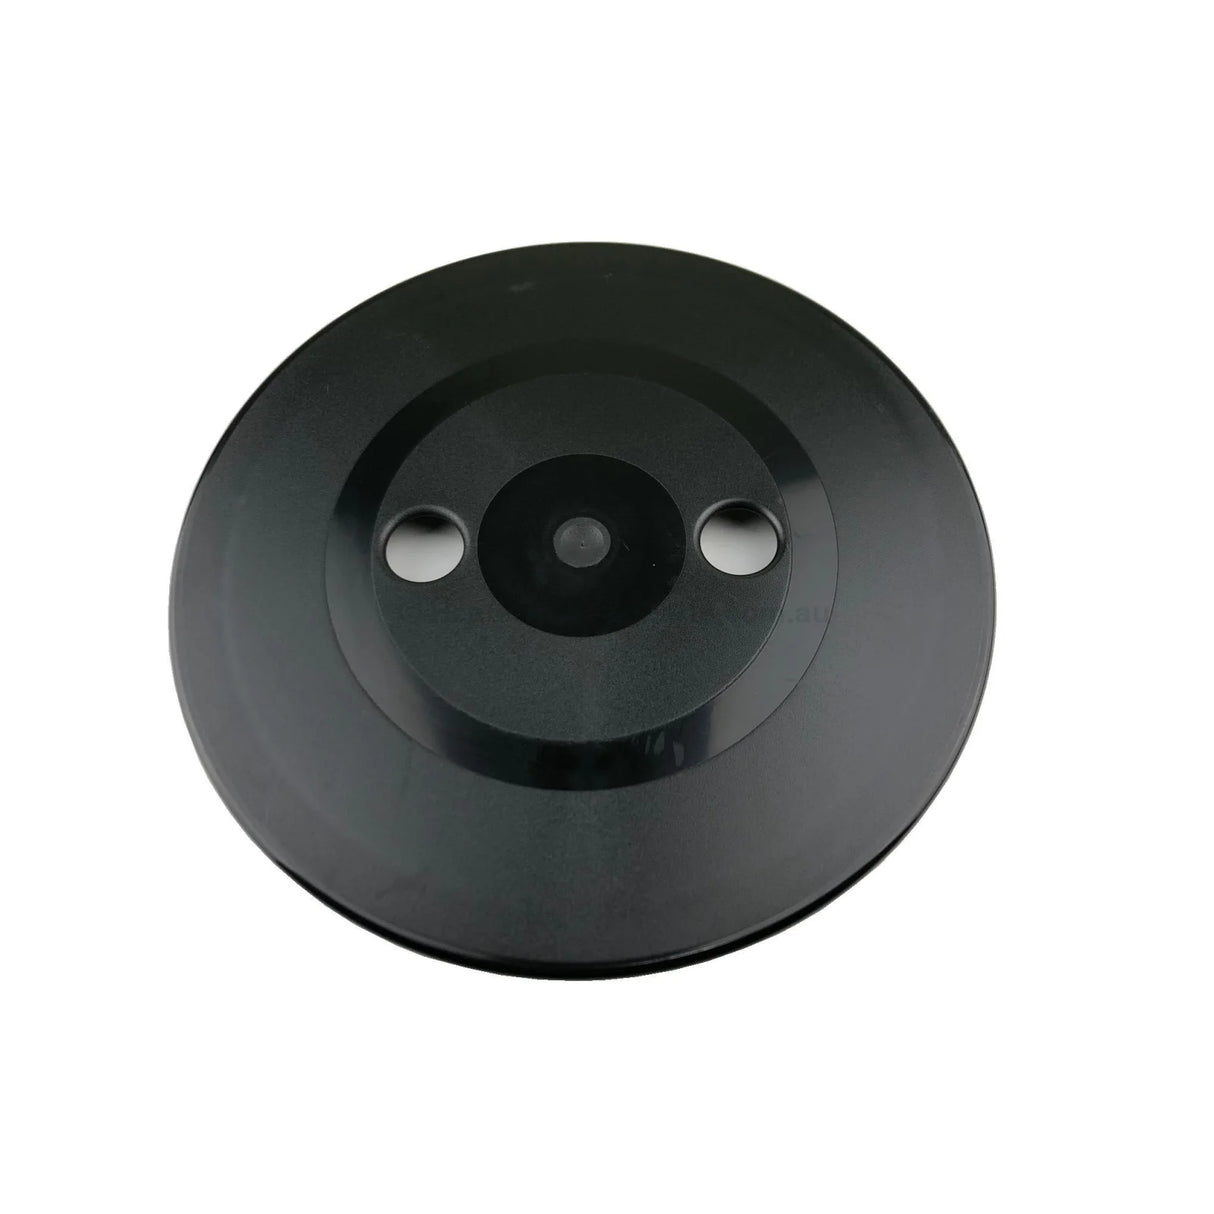 SpaQuip Series 1000 Niche Lid - Black only - Heater and Spa Parts